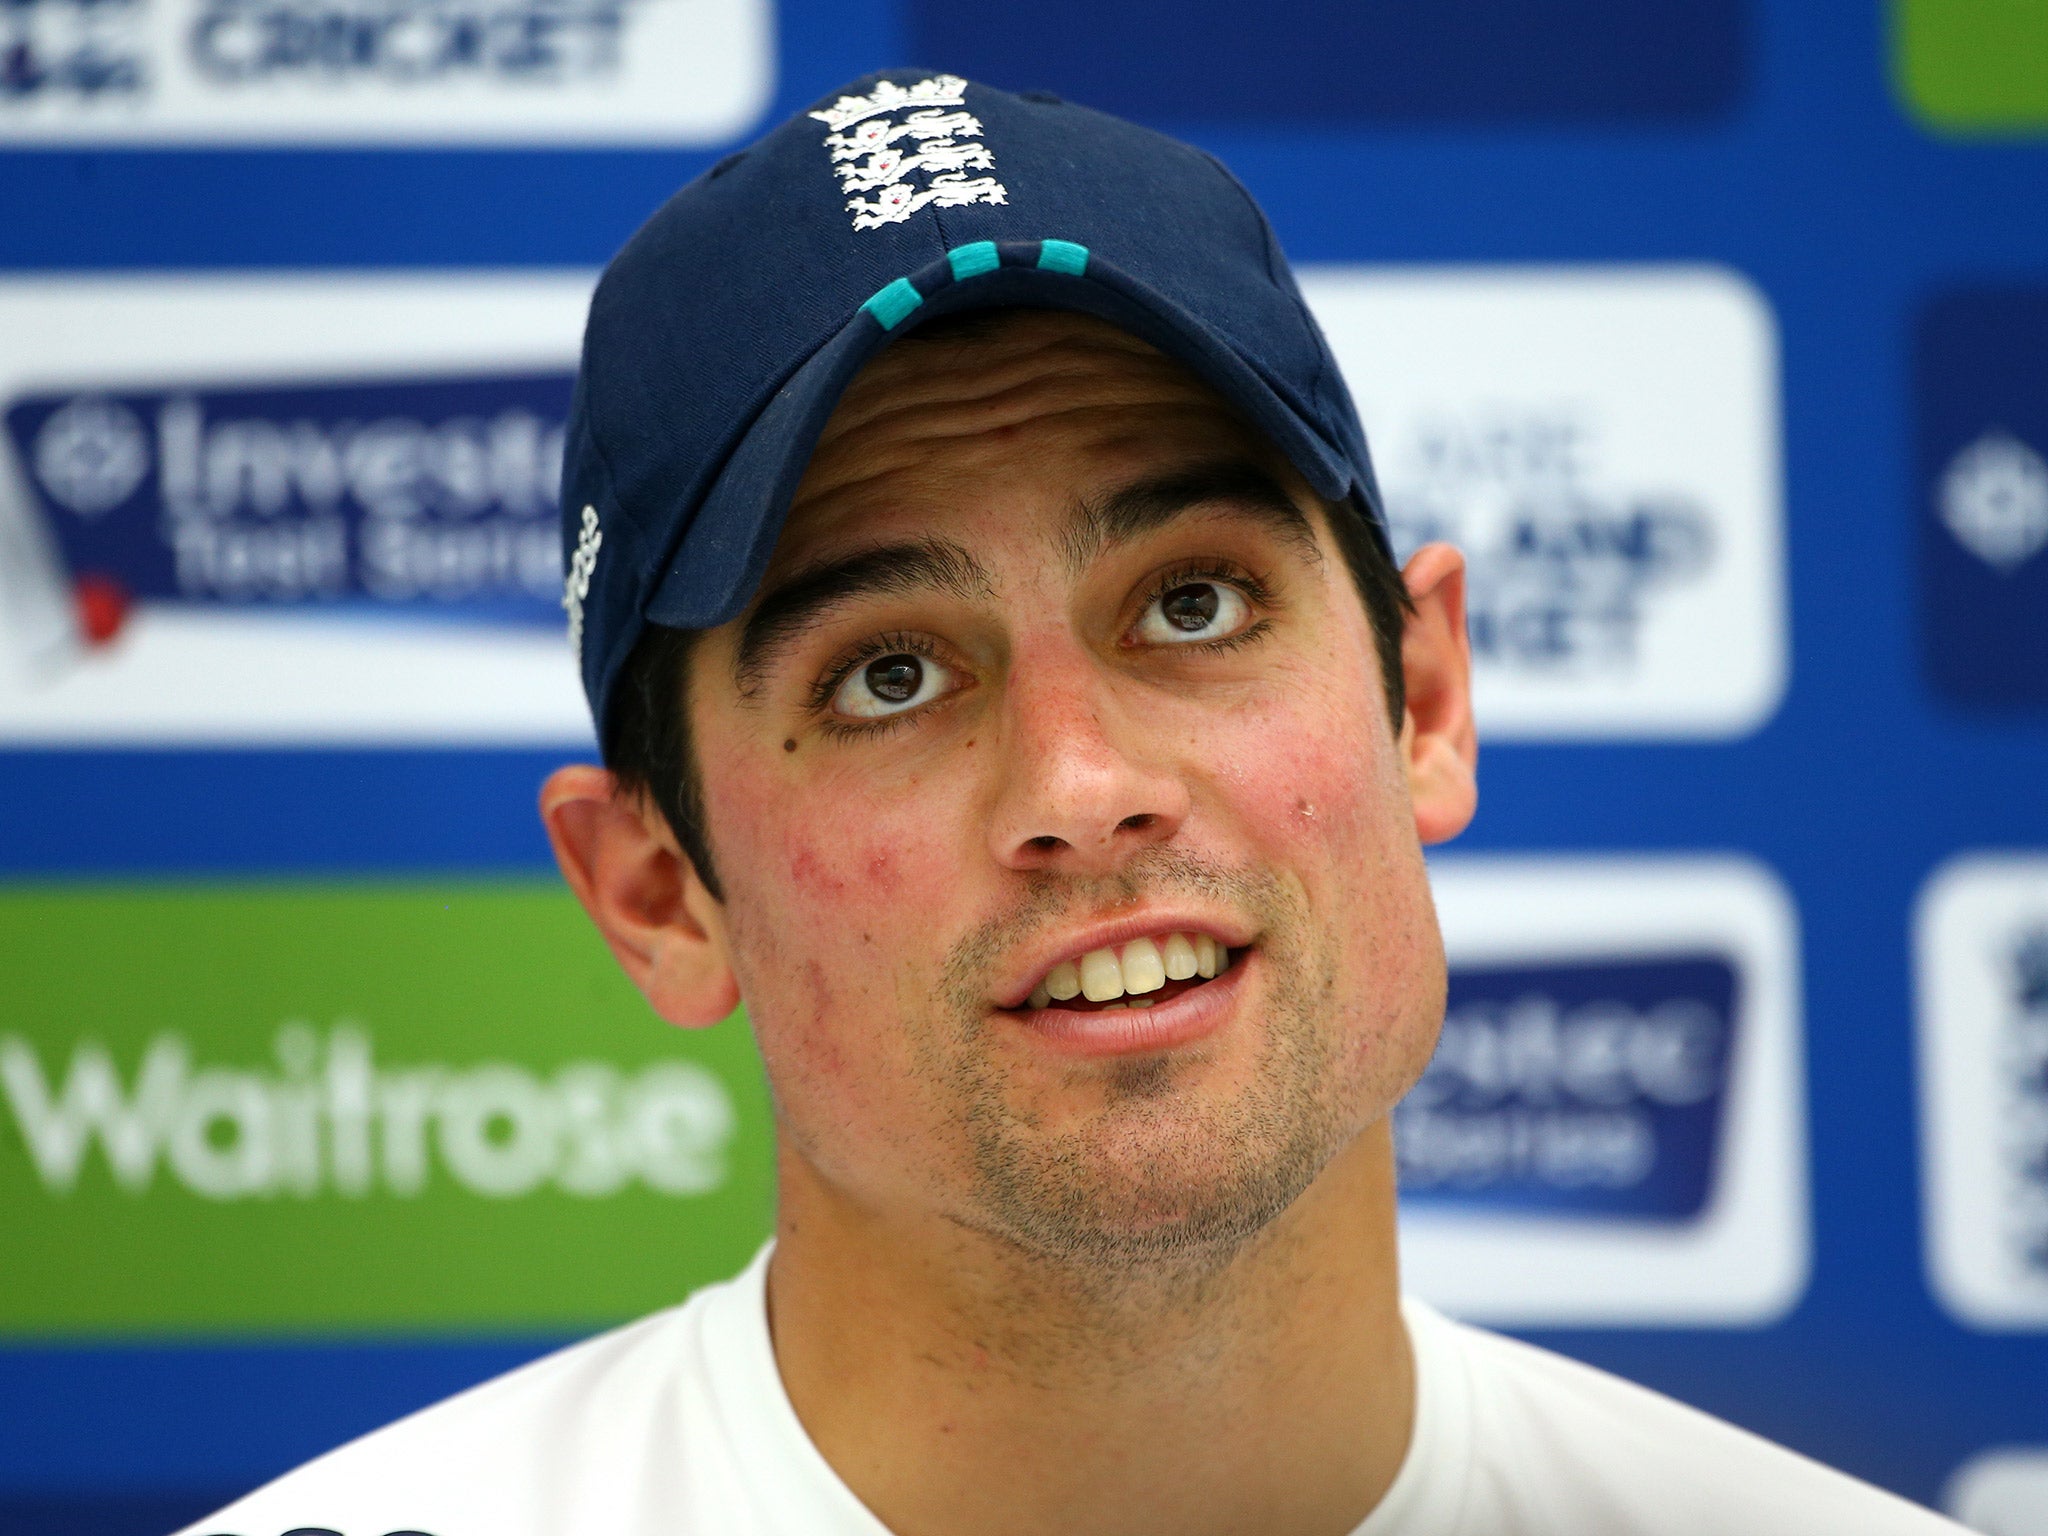 Alastair Cook dismissed ball-tampering allegations made against England